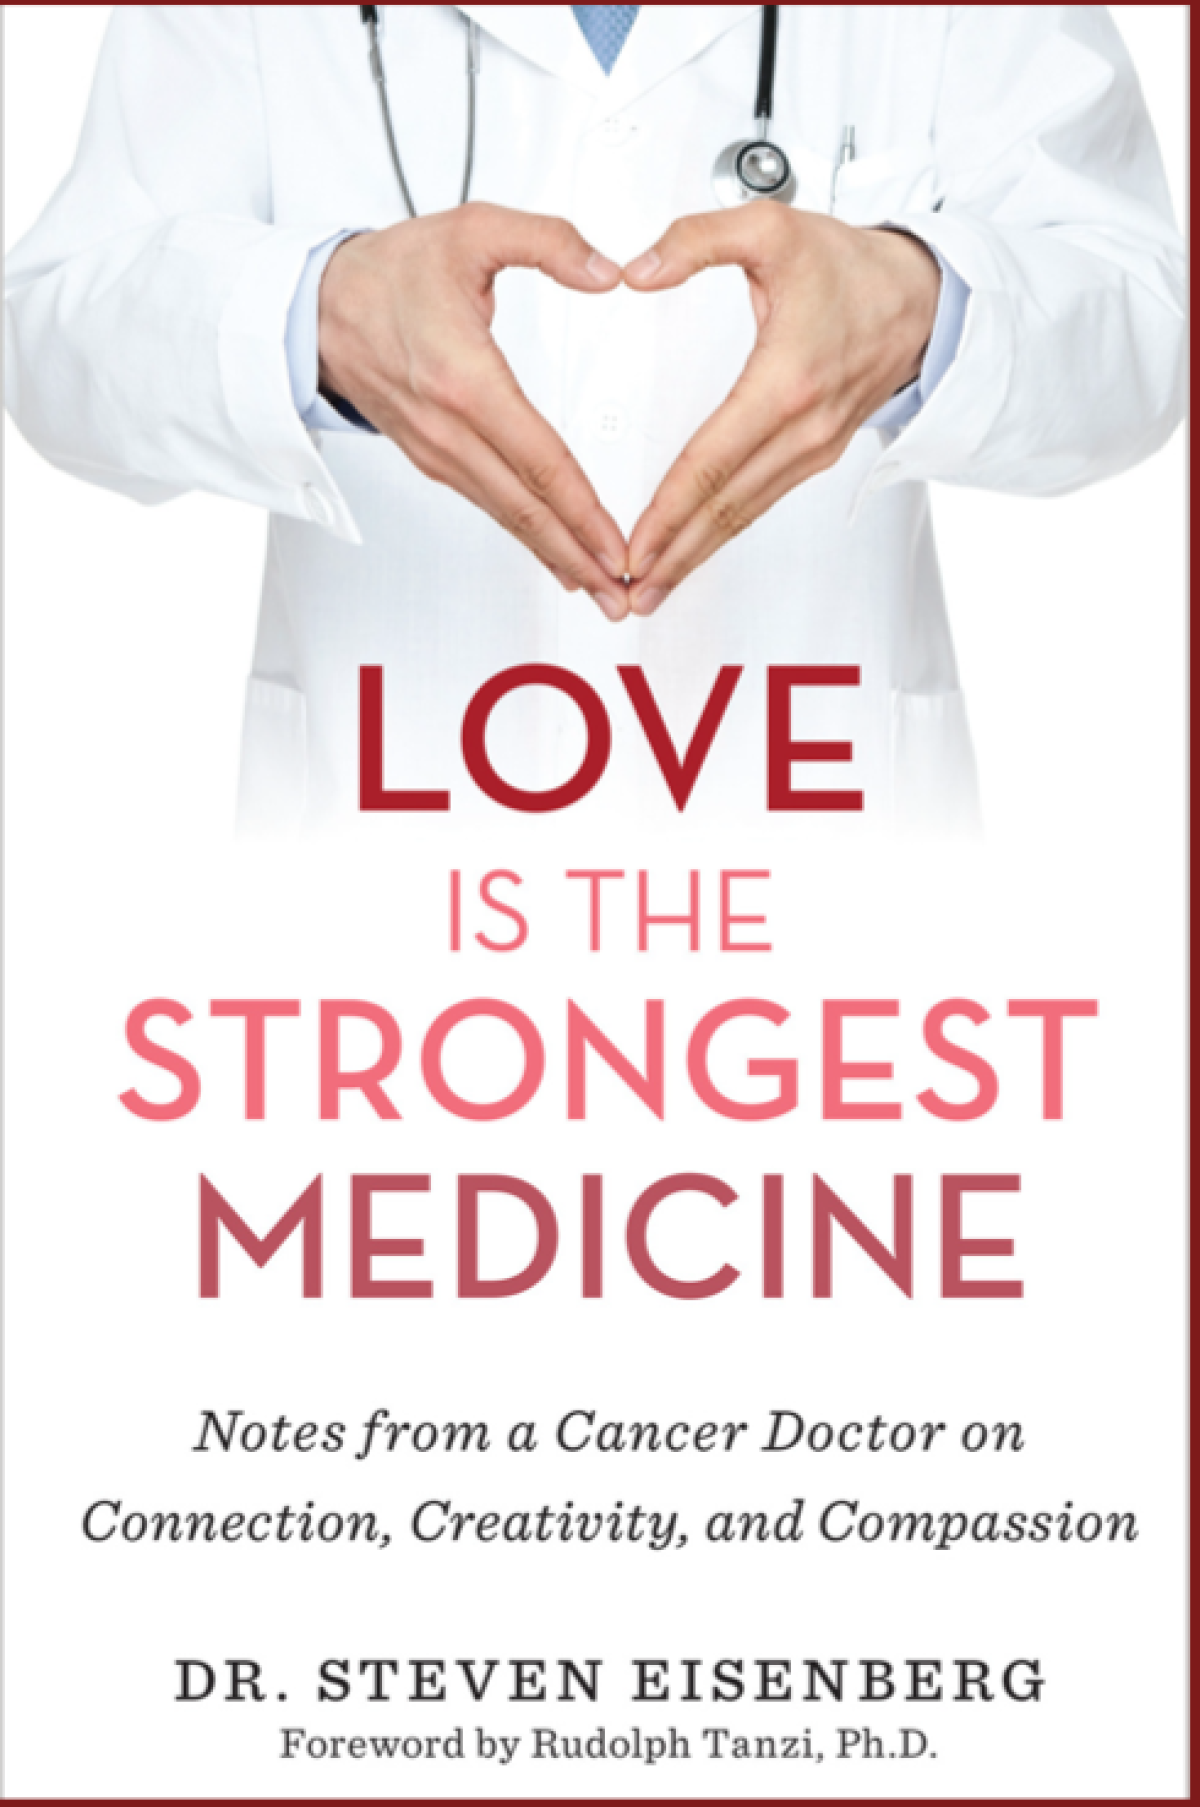 The cover of “Love is the Strongest Medicine”